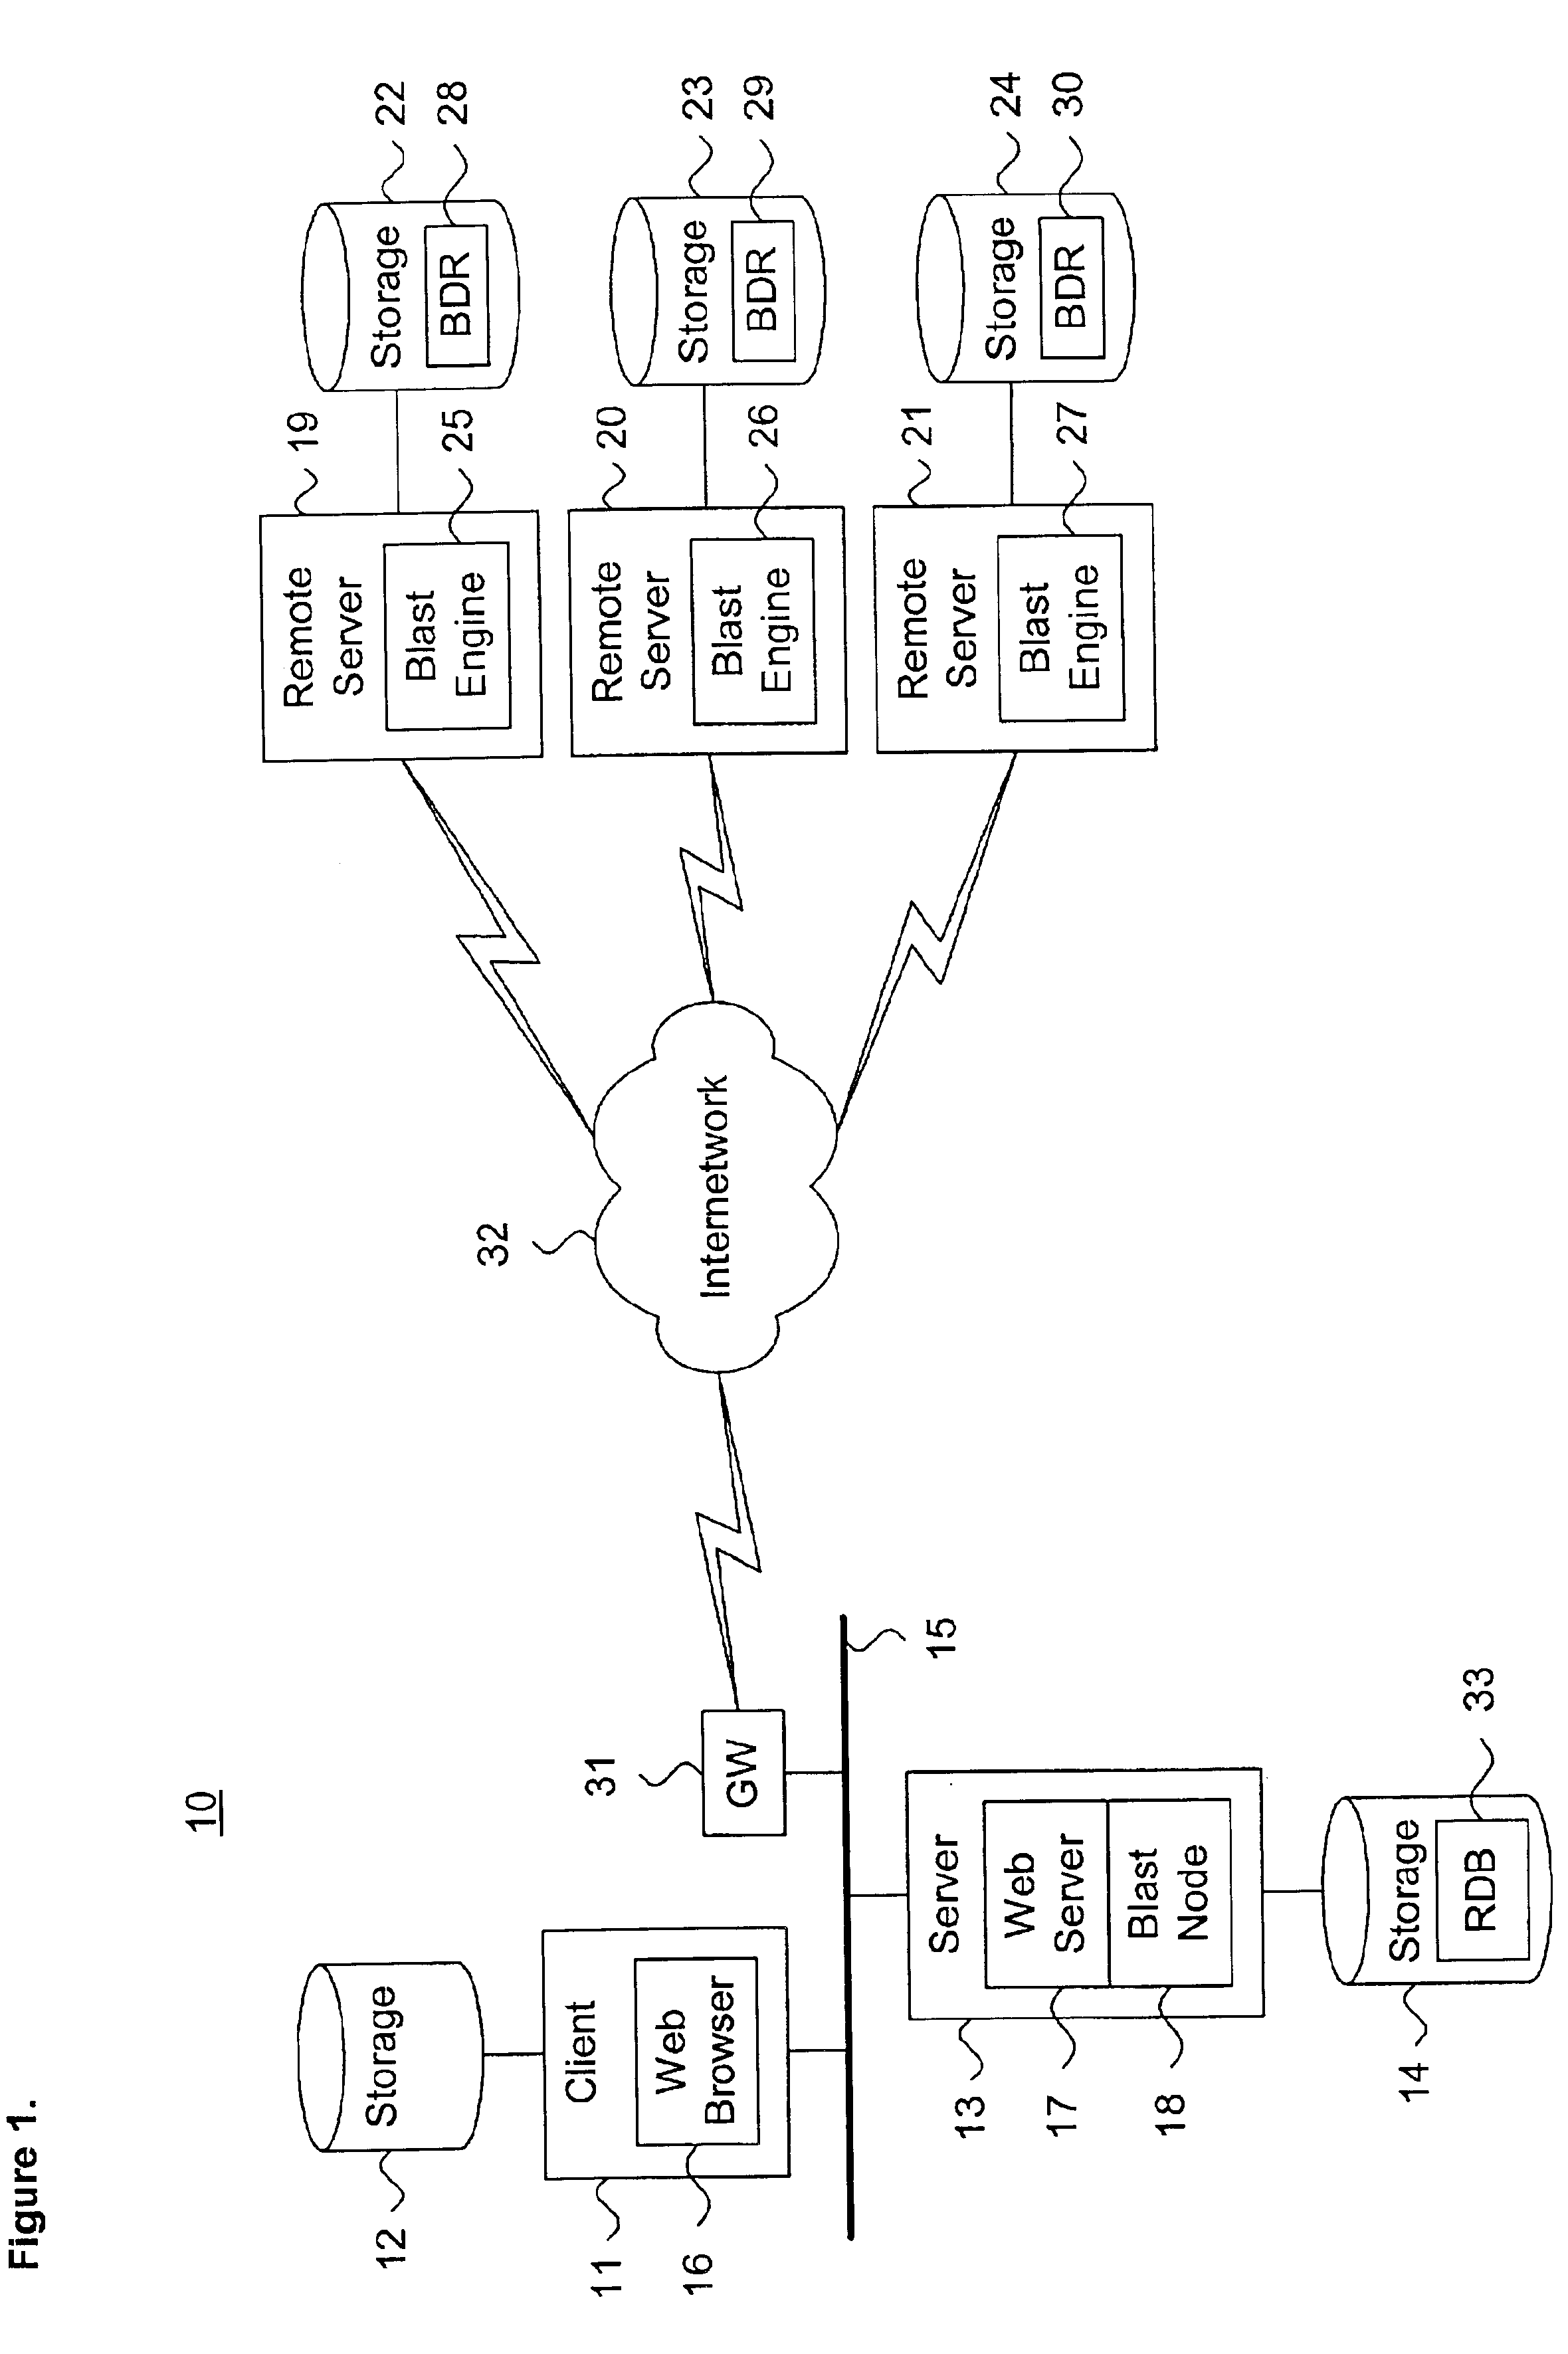 System and method for providing flexible access and retrieval of sequence data from a plurality of biological data repositories